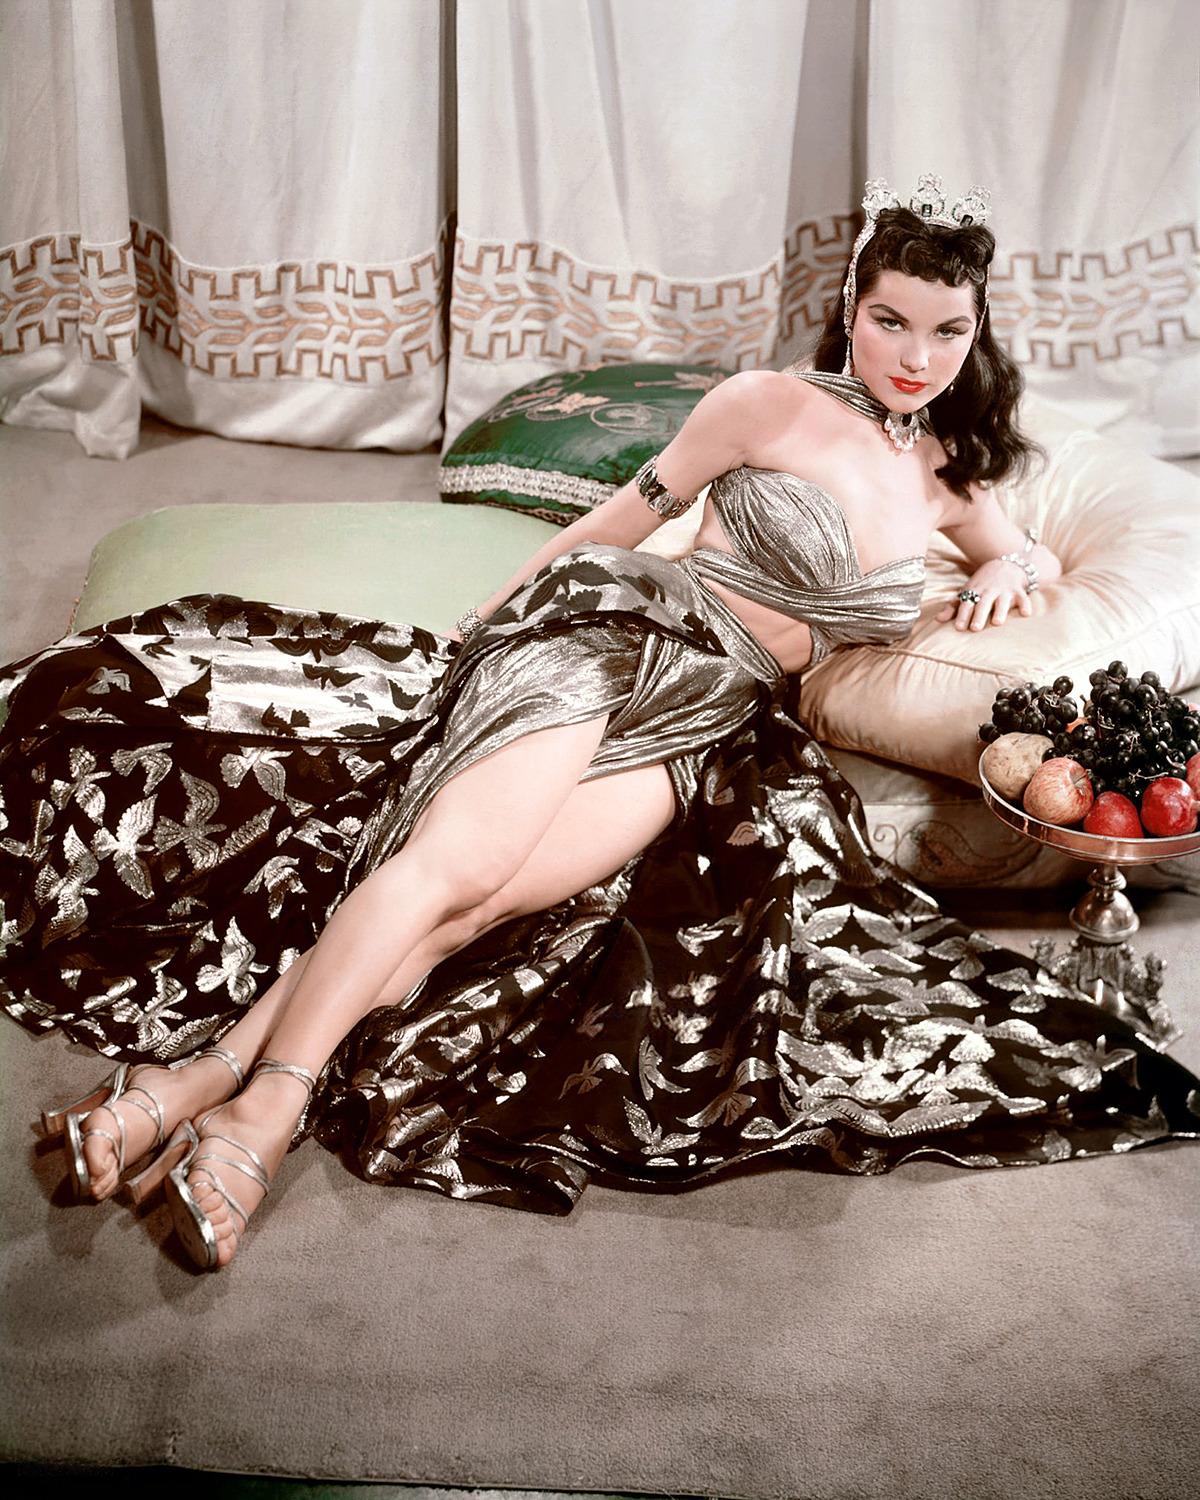 Debra Paget : publicity photo for Princess of the Nile (1954)